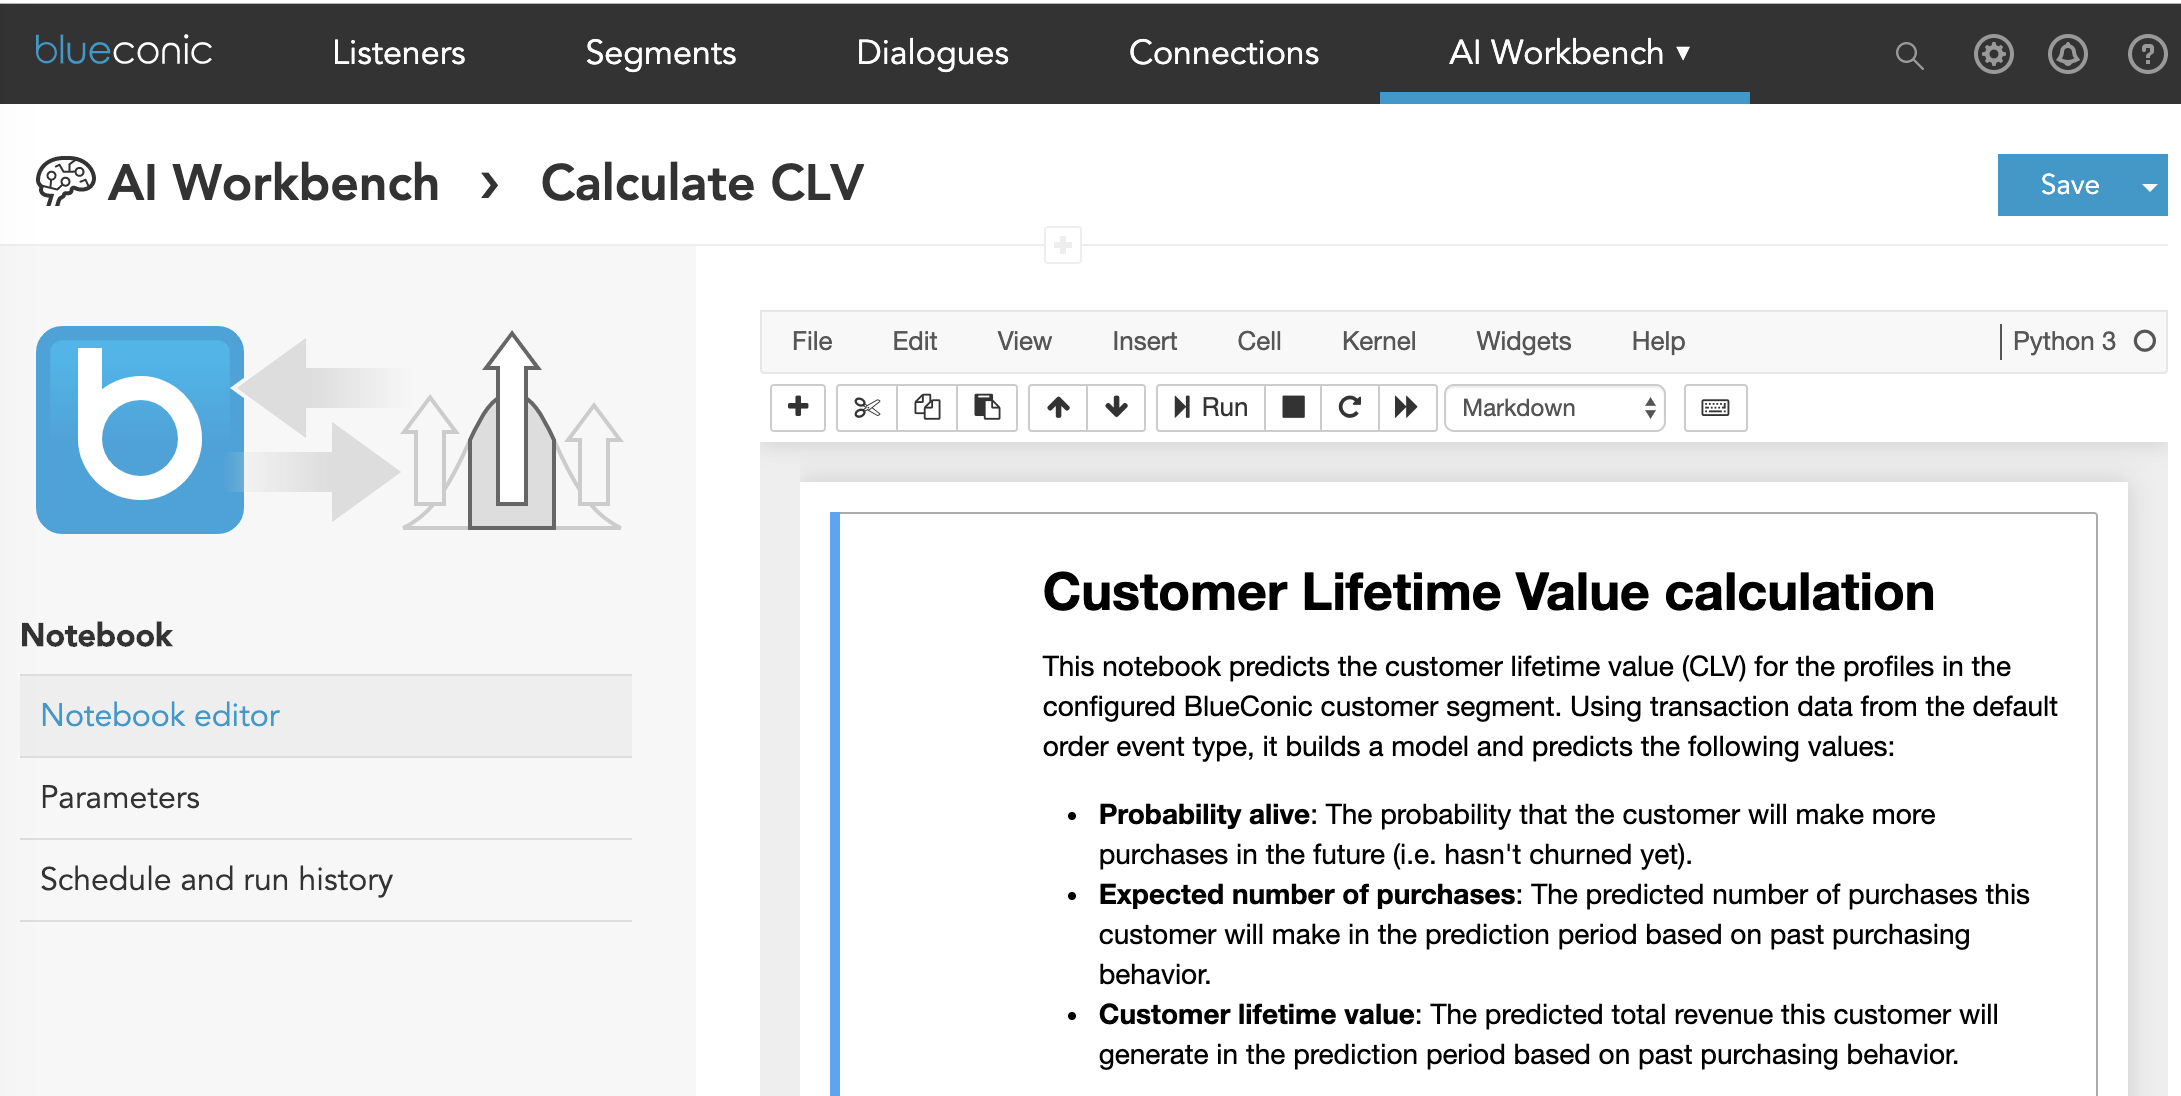 What is marketing predictive analytics? How can I use the BlueConic CDP to predict CLV and RFM scores based on AI marketing and machine learning with customer segments and profile data?